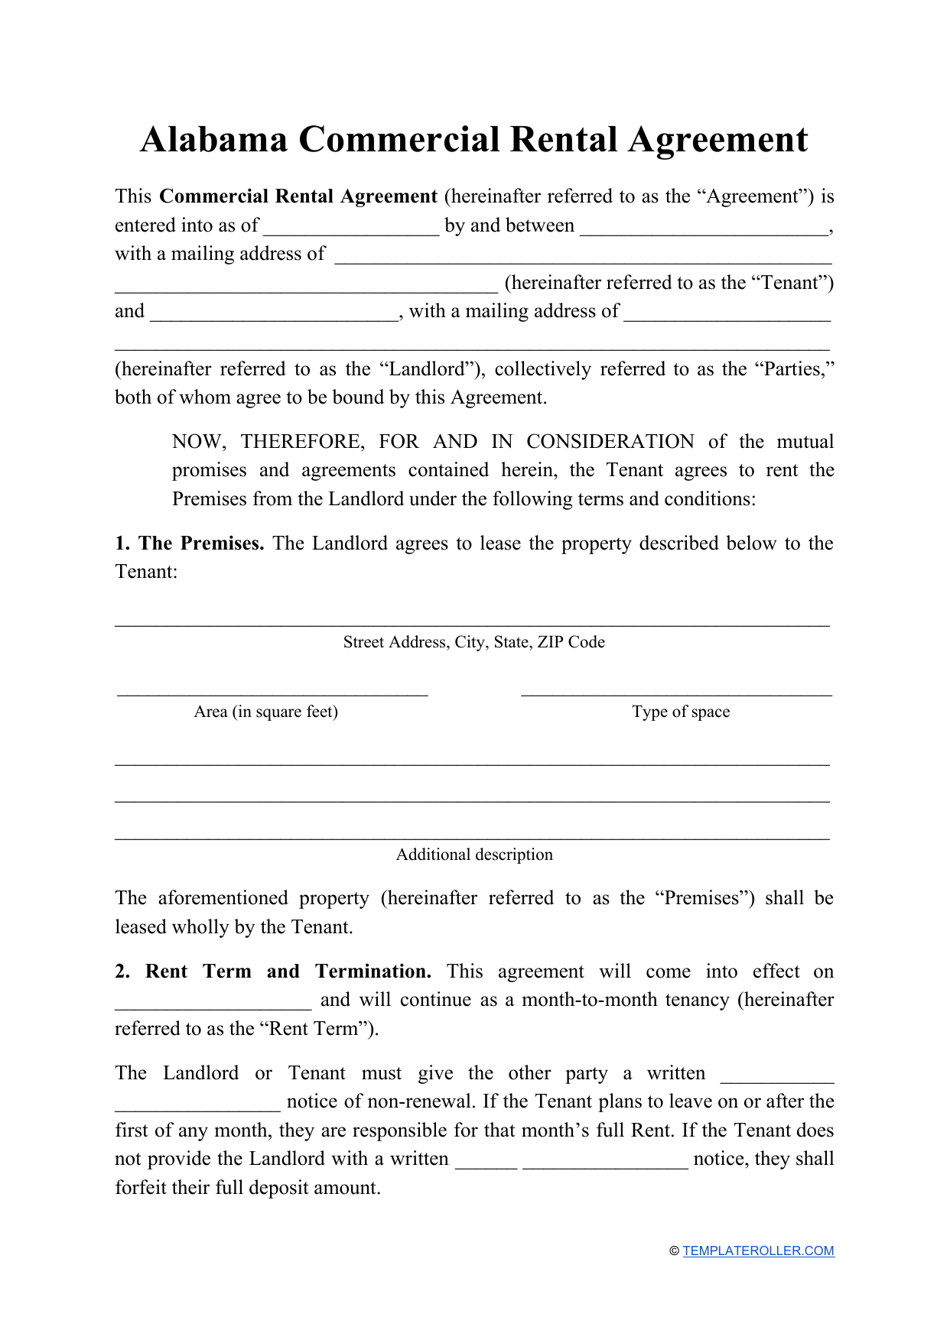 Commercial Rental Agreement Template - Alabama, Page 1